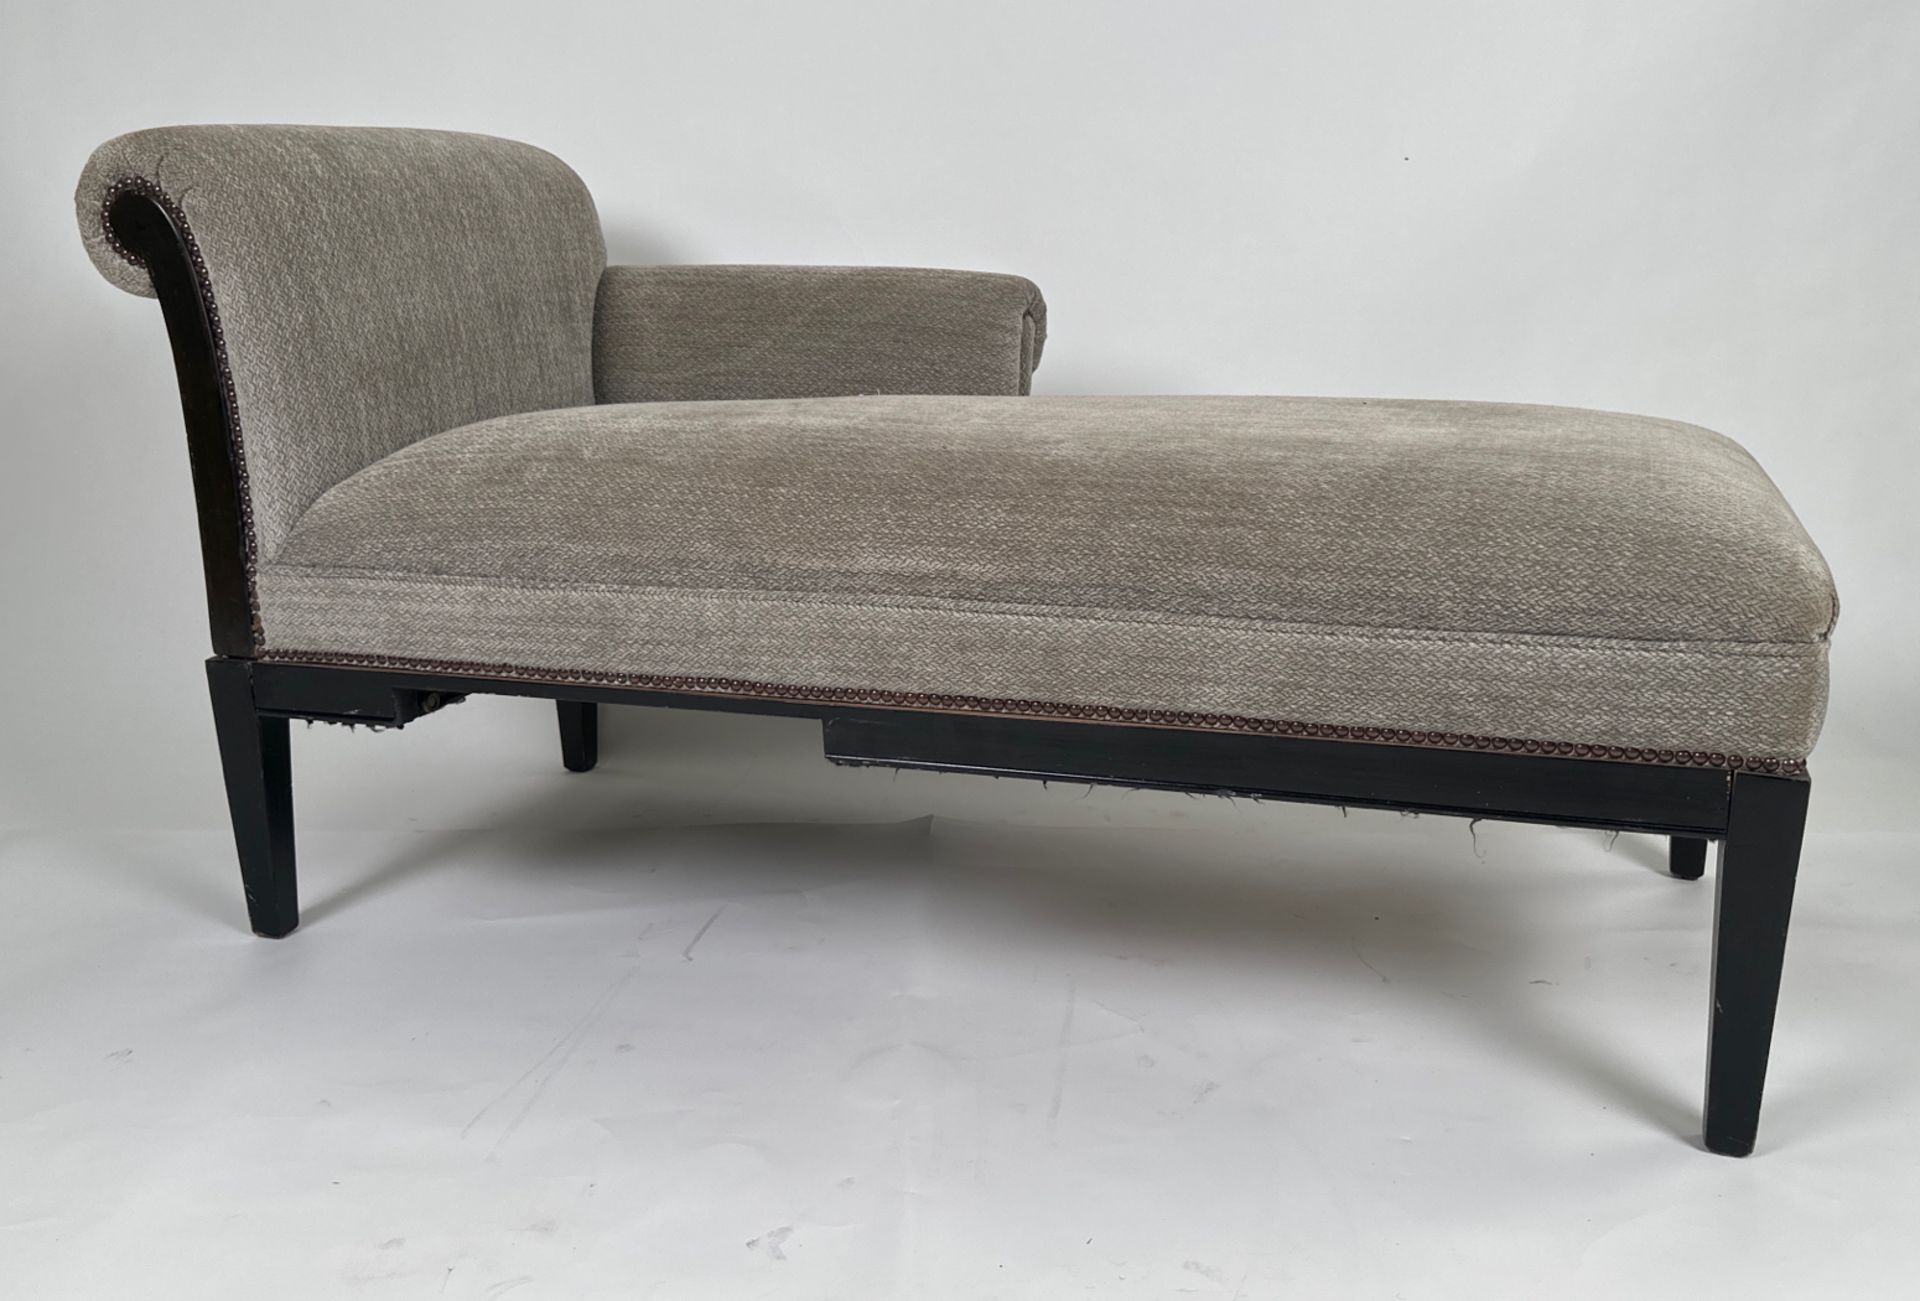 Contemporary Chaise Lounge